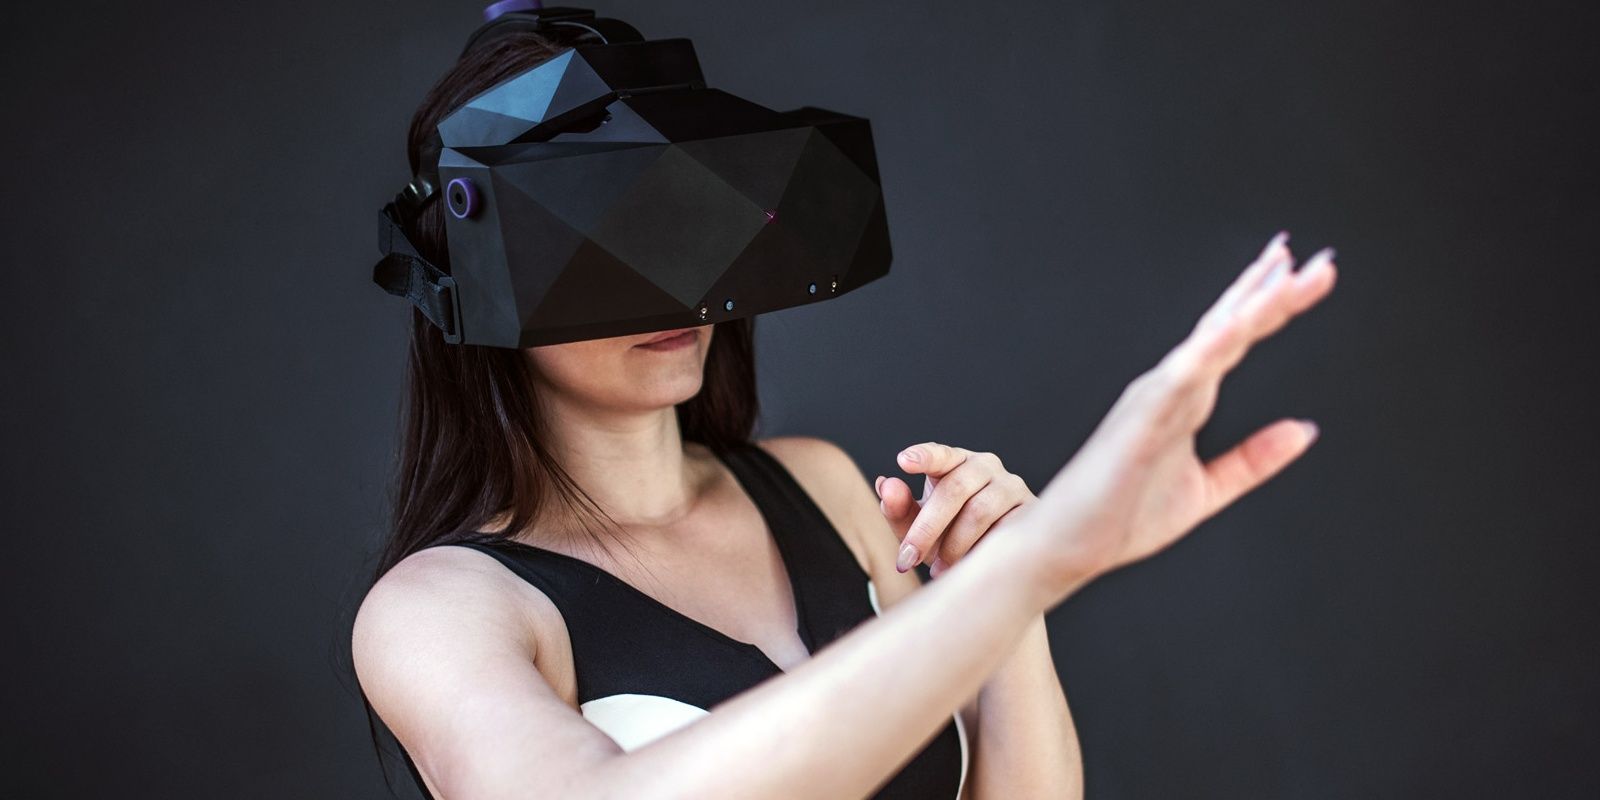 Woman with VR headset reaching her hand out